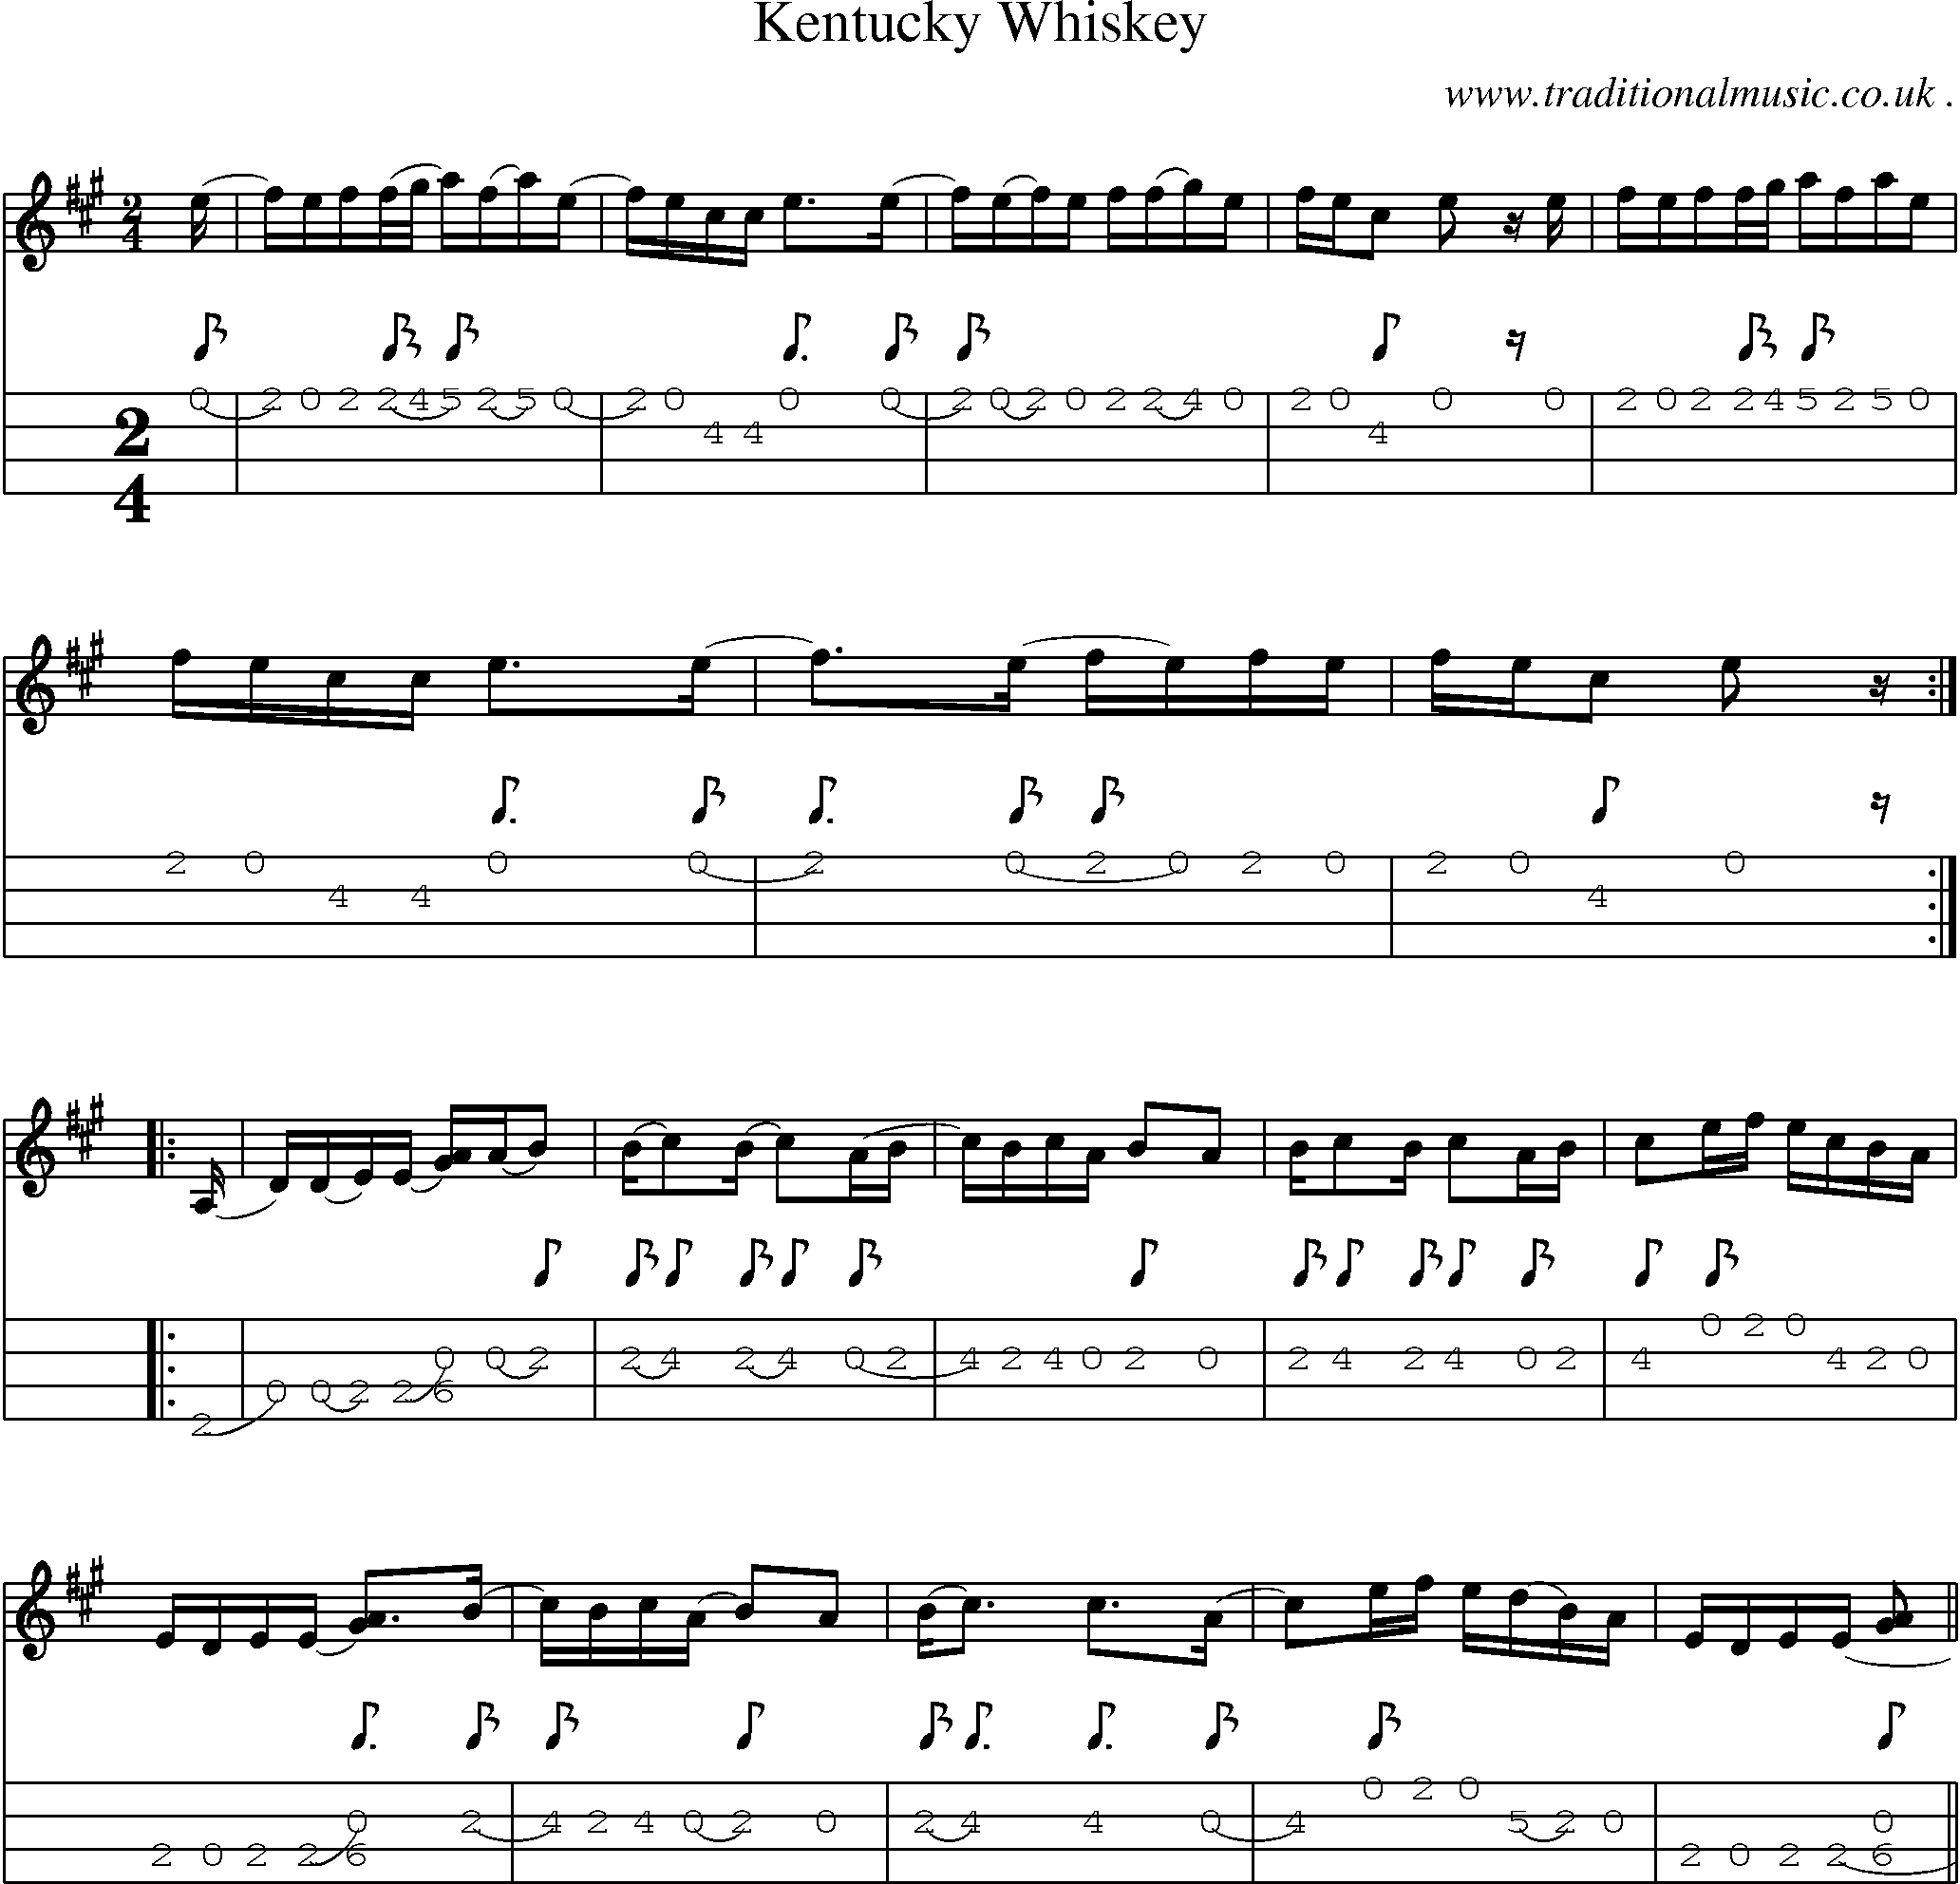 Music Score and Mandolin Tabs for Kentucky Whiskey